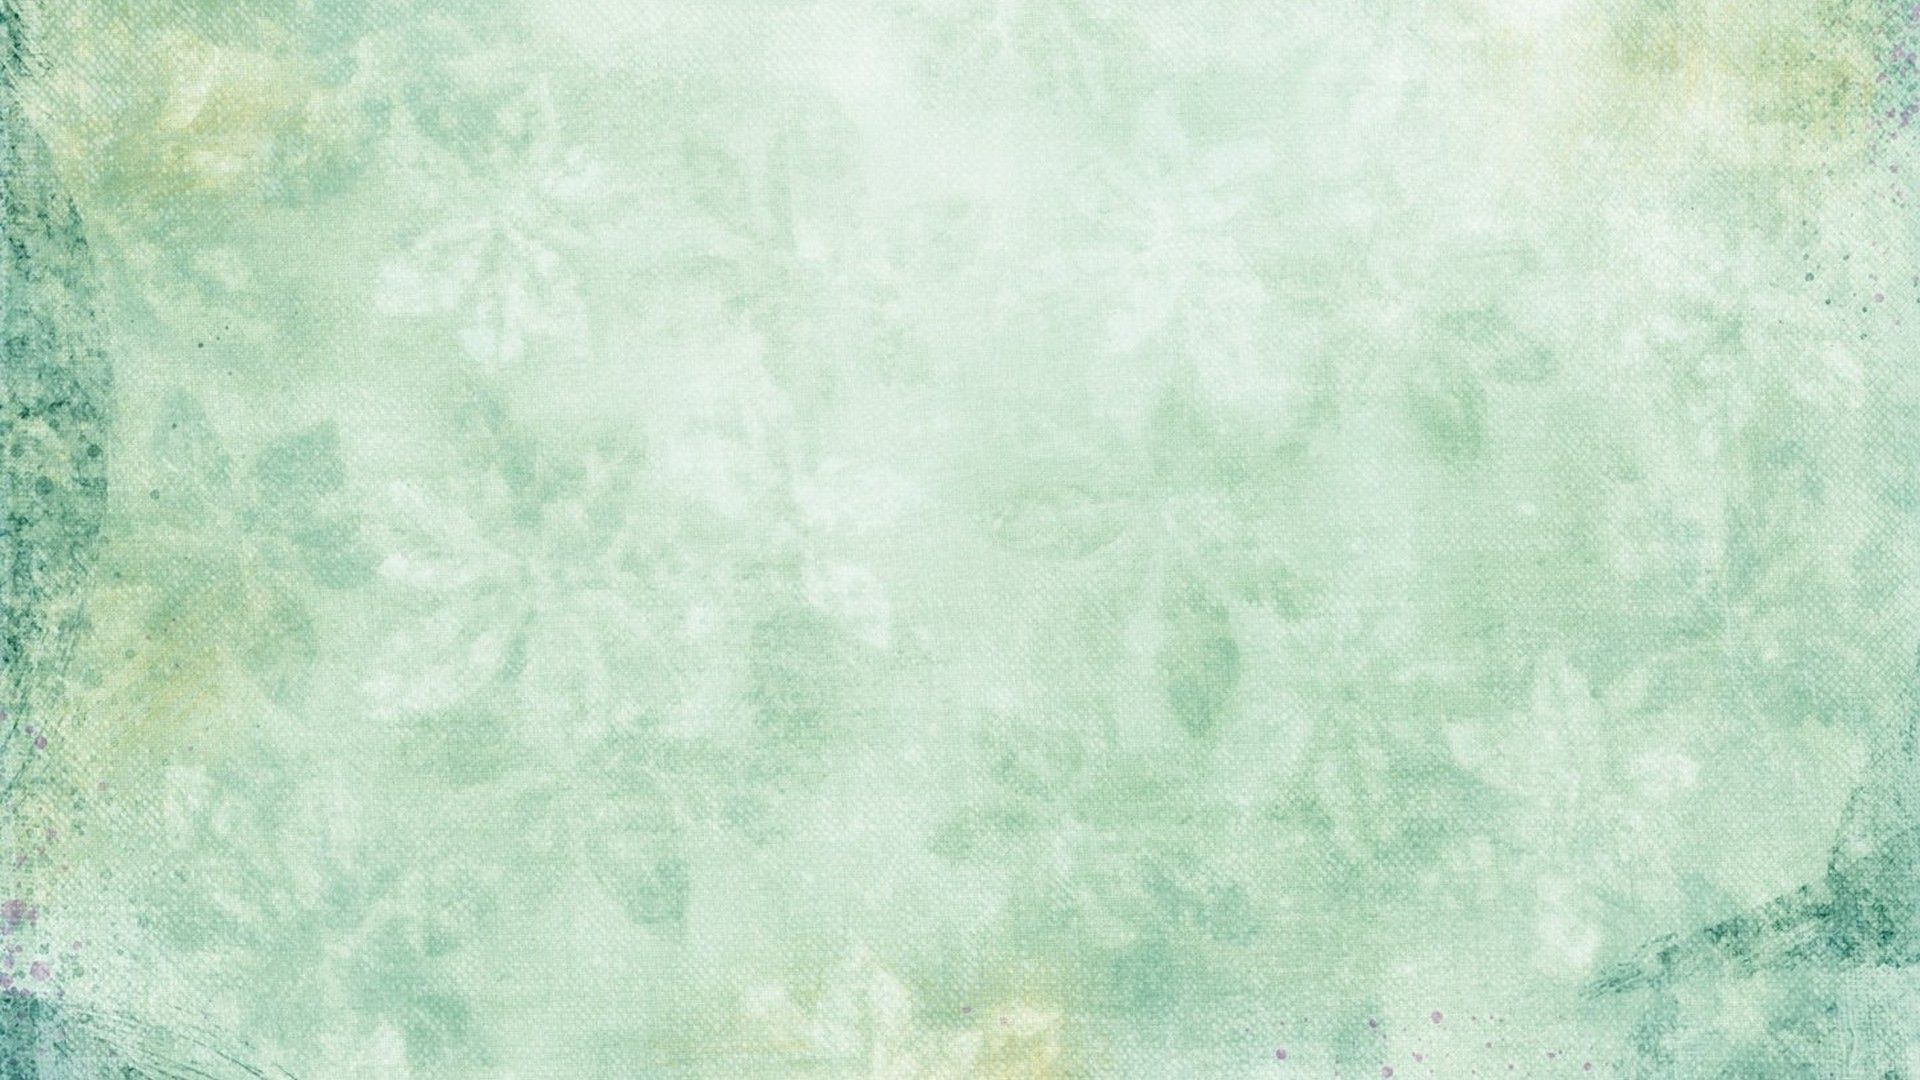 A vintage green background with a watercolor texture - Sage green, pastel green, mint green